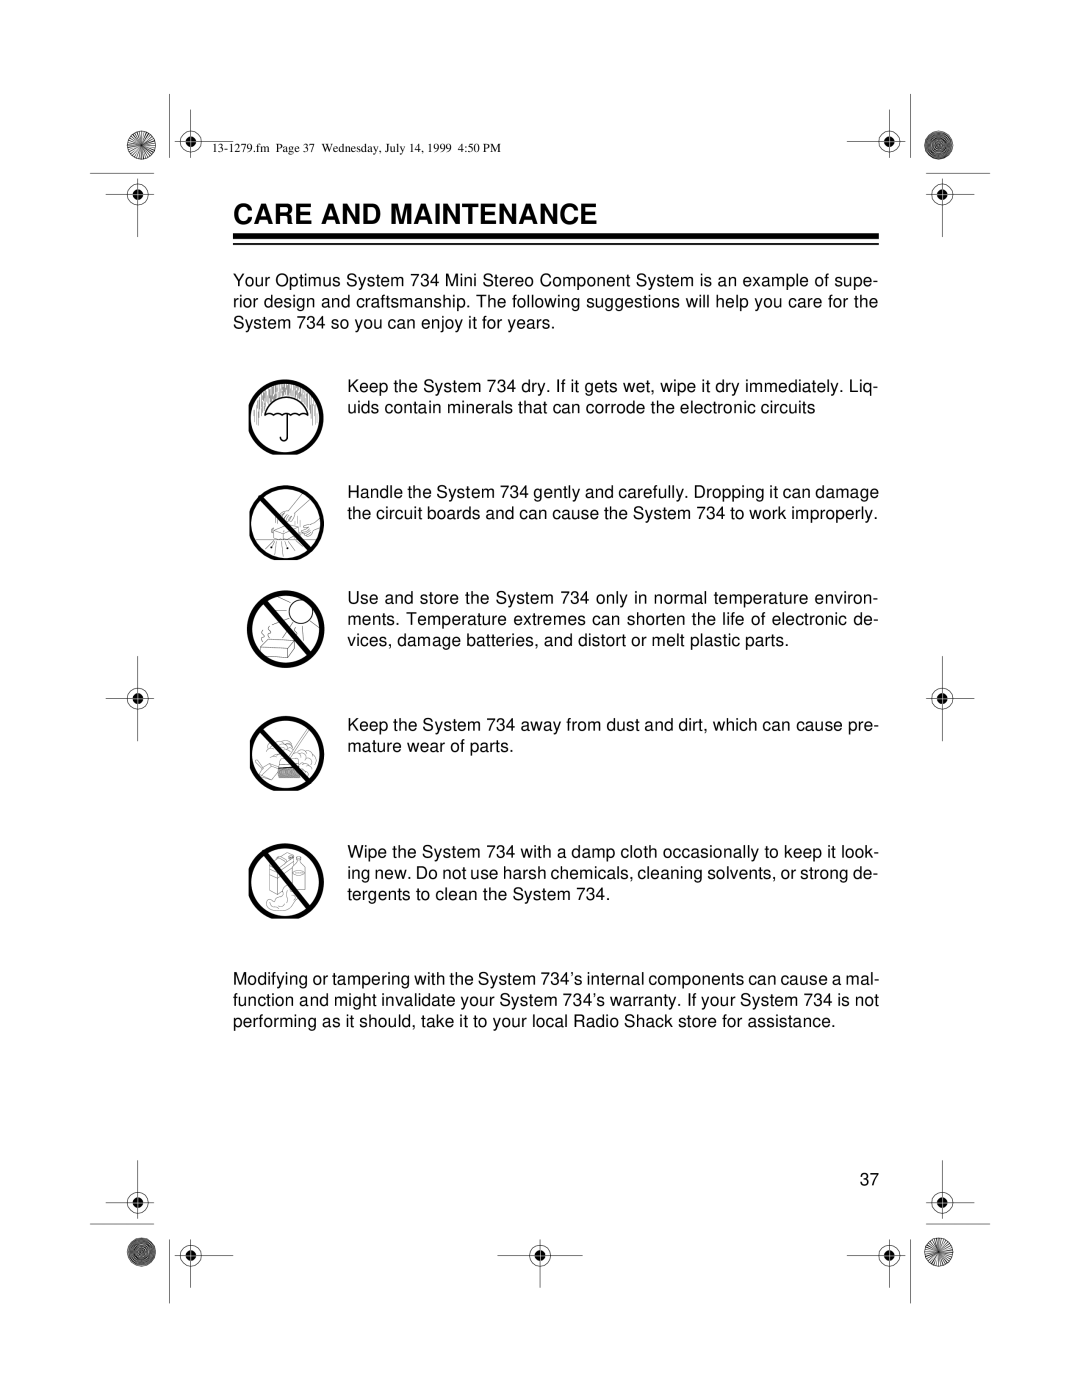 Optimus SYSTEM 734 owner manual Care And Maintenance 